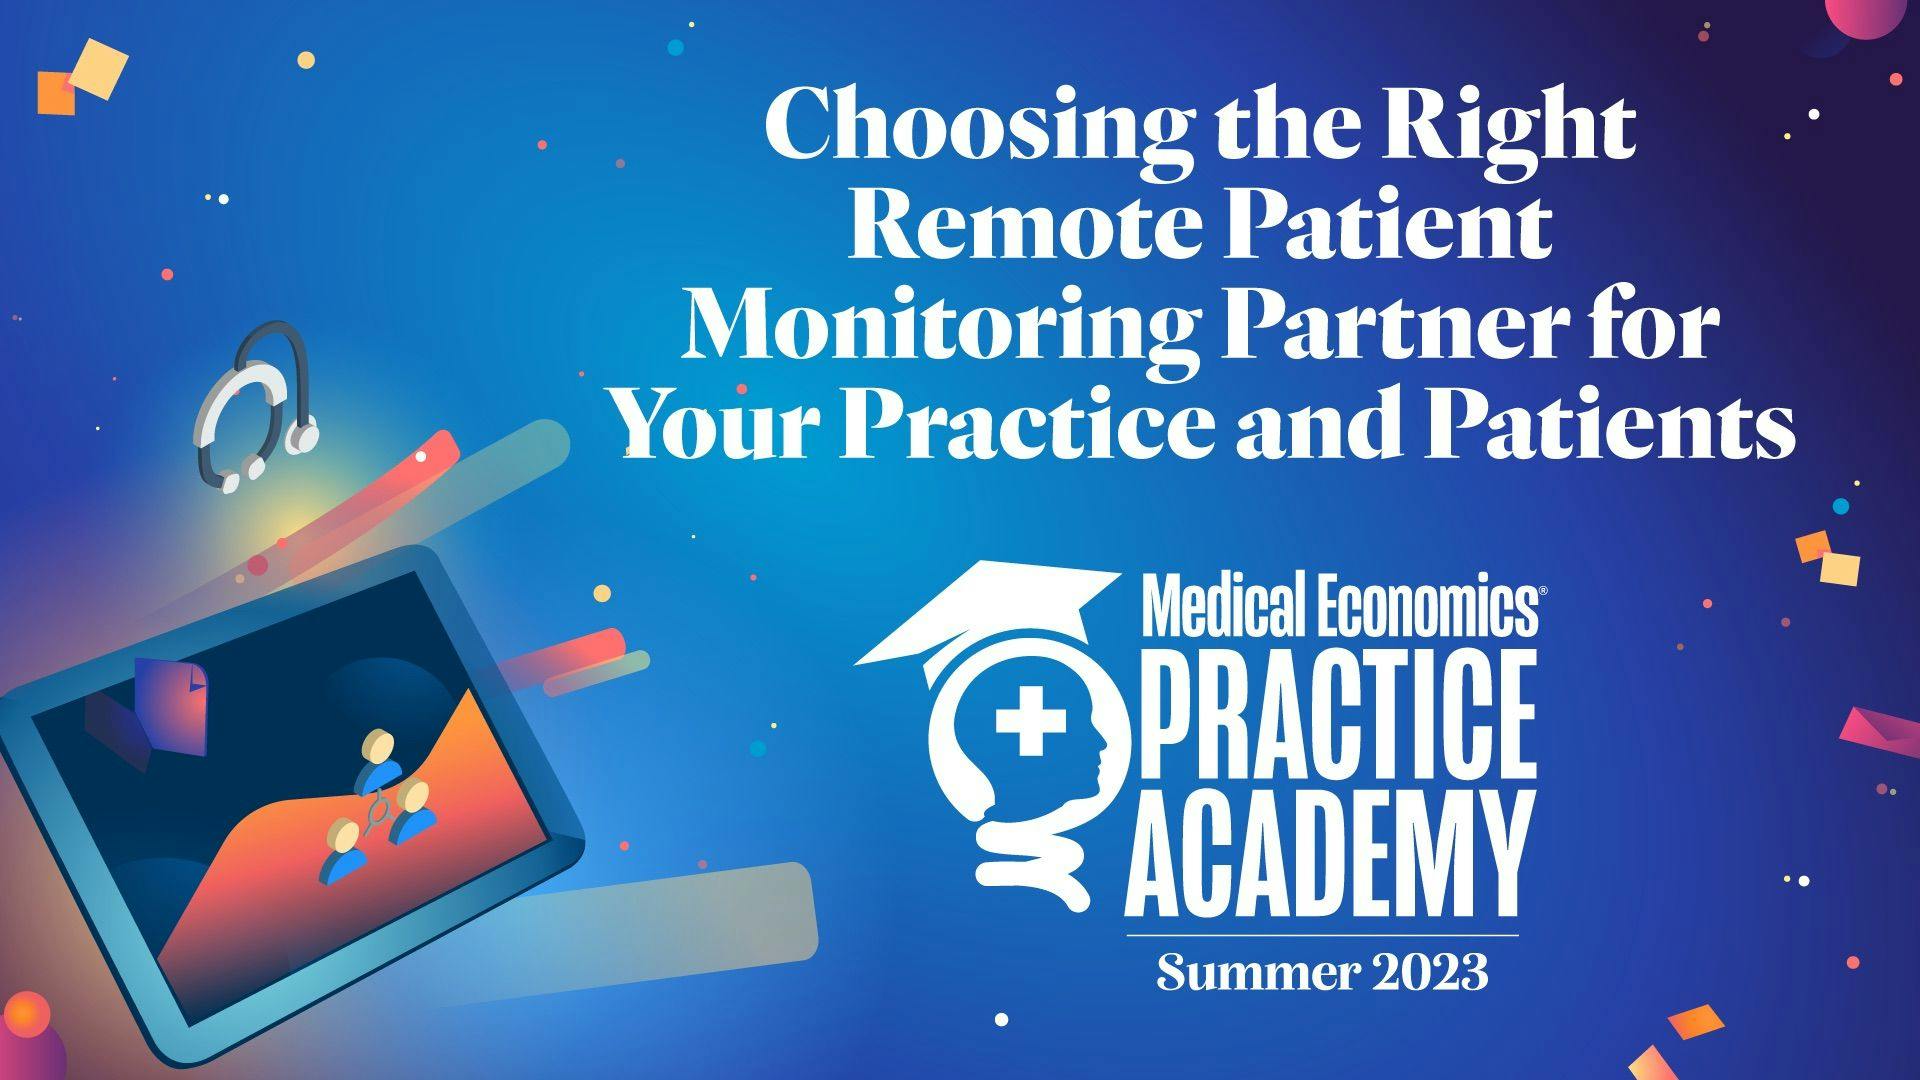 Choosing the Right Remote Patient Monitoring Partner for Your Practice and Patients